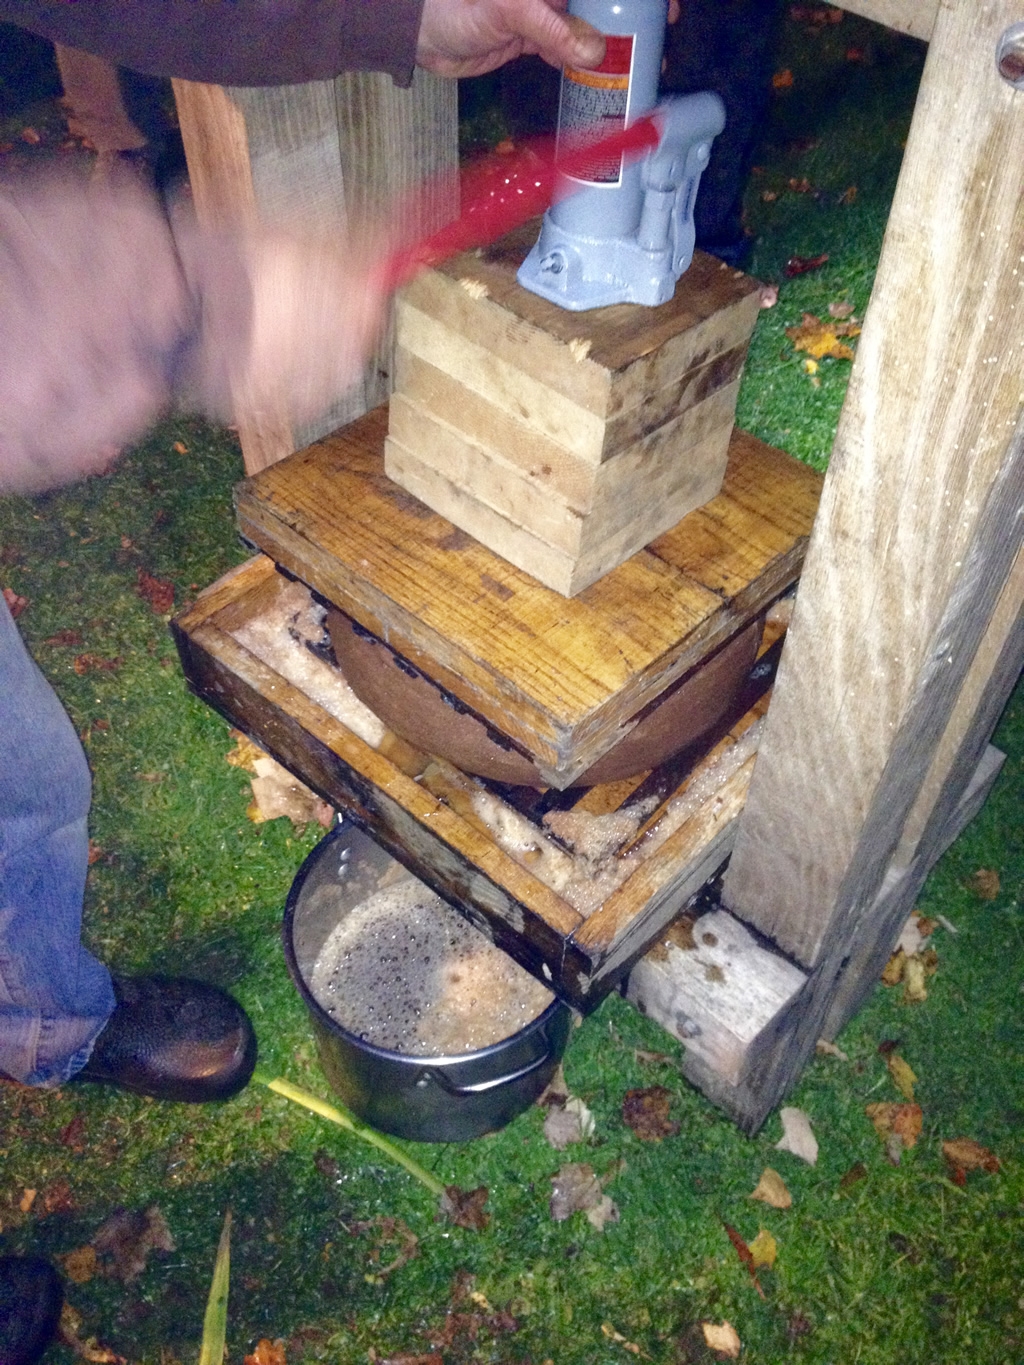 Apple Press in Action